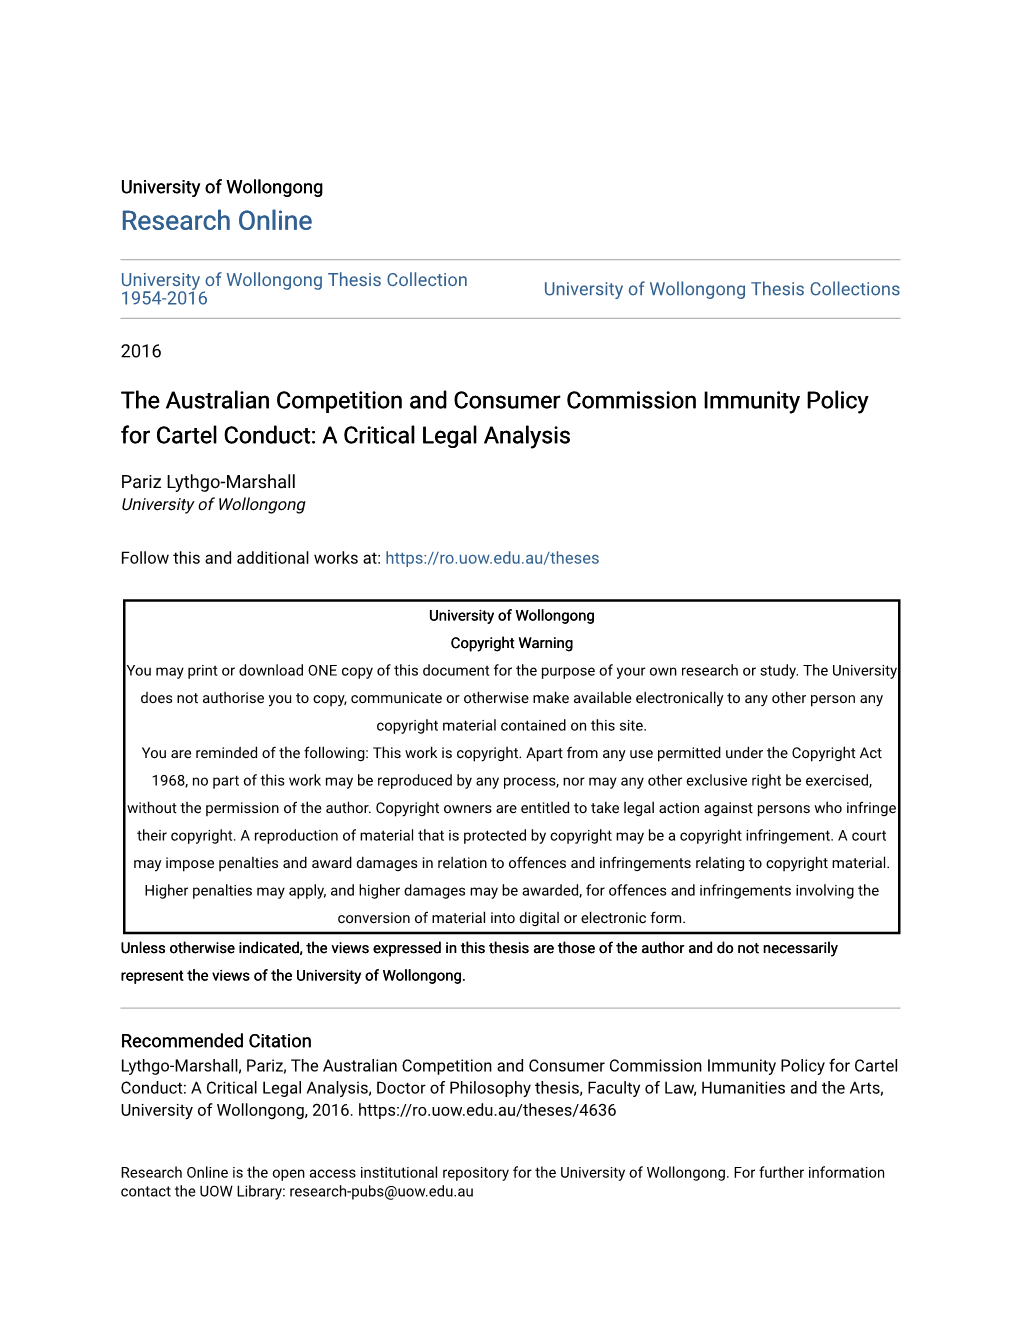 The Australian Competition and Consumer Commission Immunity Policy for Cartel Conduct: a Critical Legal Analysis